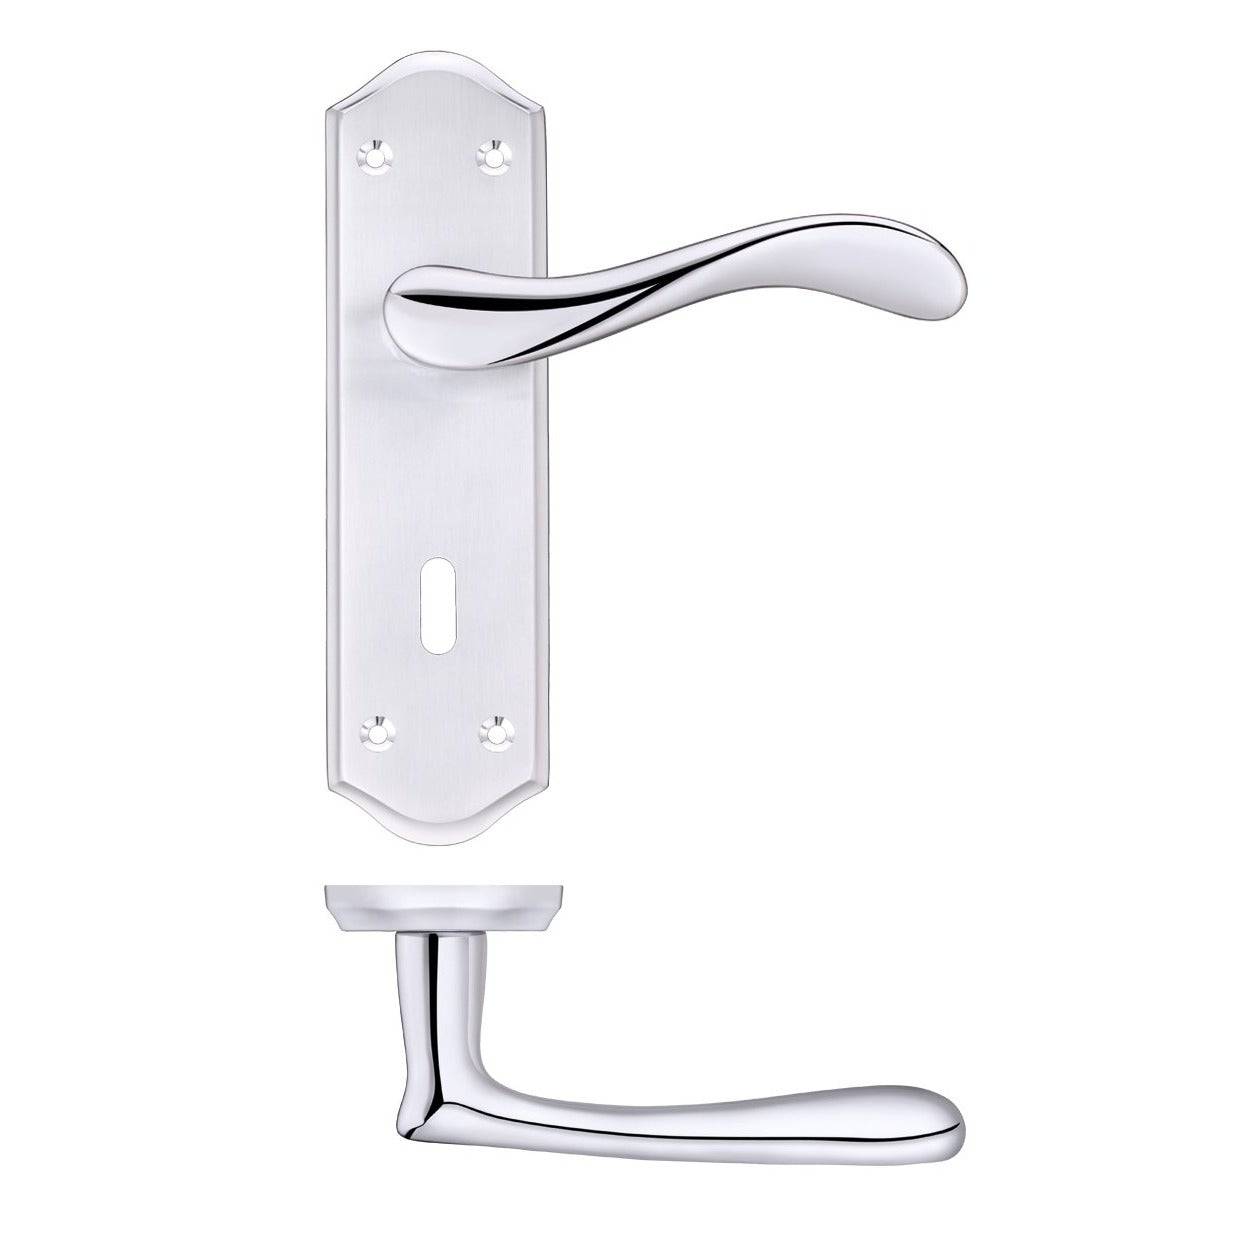 Zoo Project Asti lever on lock backplate - Abbey Hardware